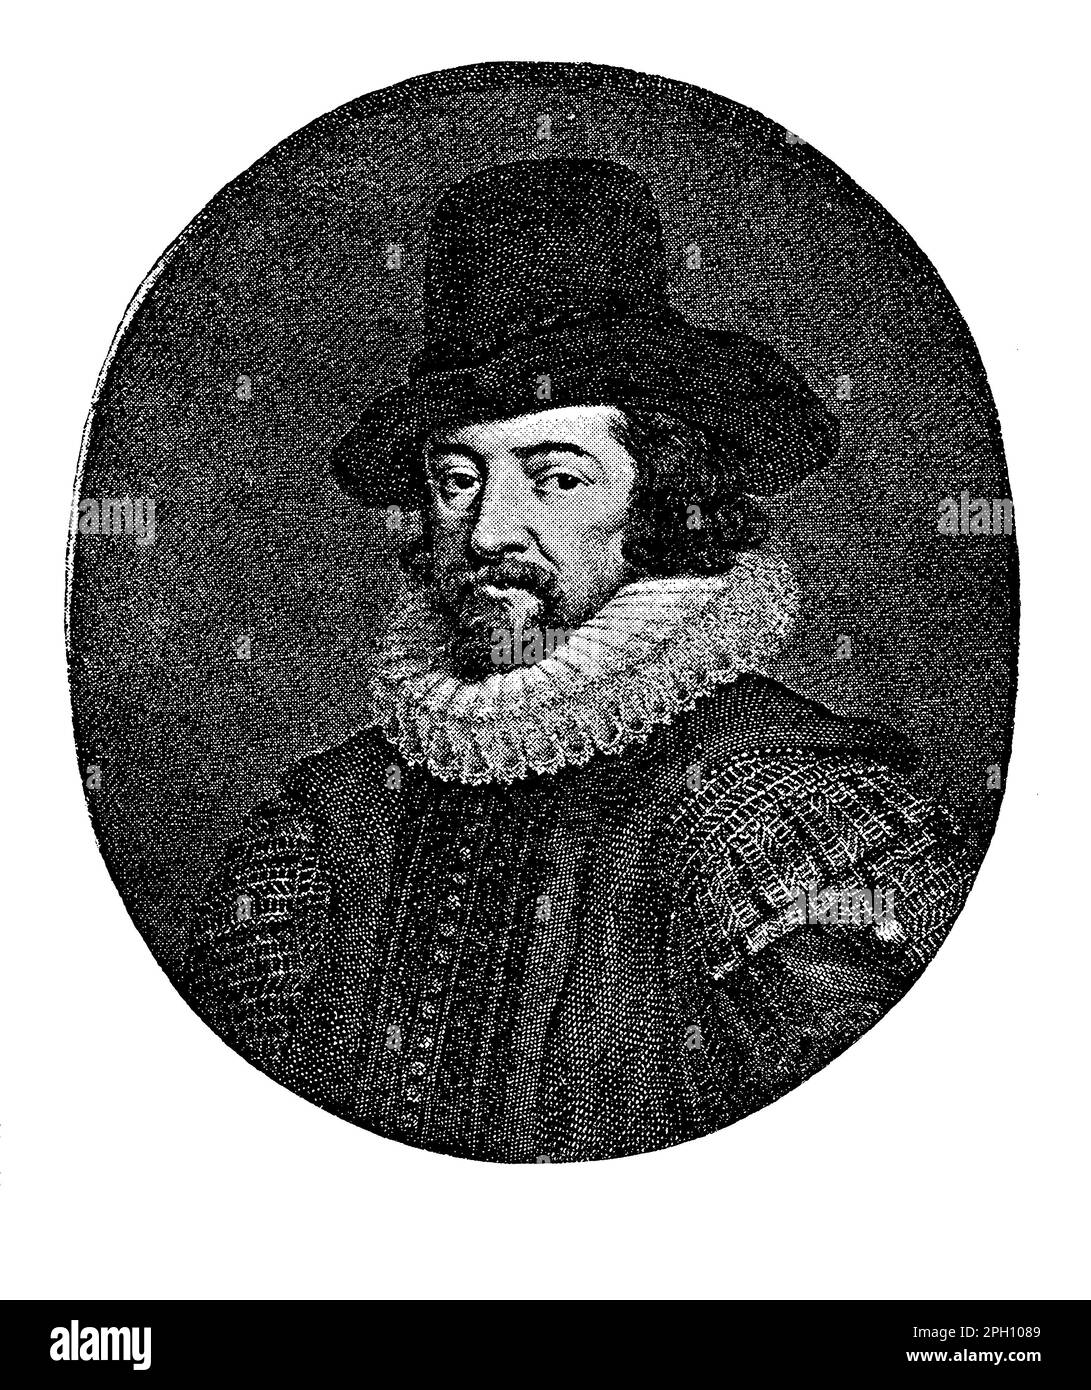 Francis Bacon (1561-1626) was an English philosopher, statesman, and scientist who is regarded as the father of empiricism and the scientific method. His works had a significant impact on the development of natural philosophy, modern science, and the philosophy of science. Some of his notable works include Novum Organum, Advancement of Learning, and New Atlantis. Bacon's ideas on science, knowledge, and progress continue to be influential in contemporary debates in philosophy, science, and technology Stock Photo